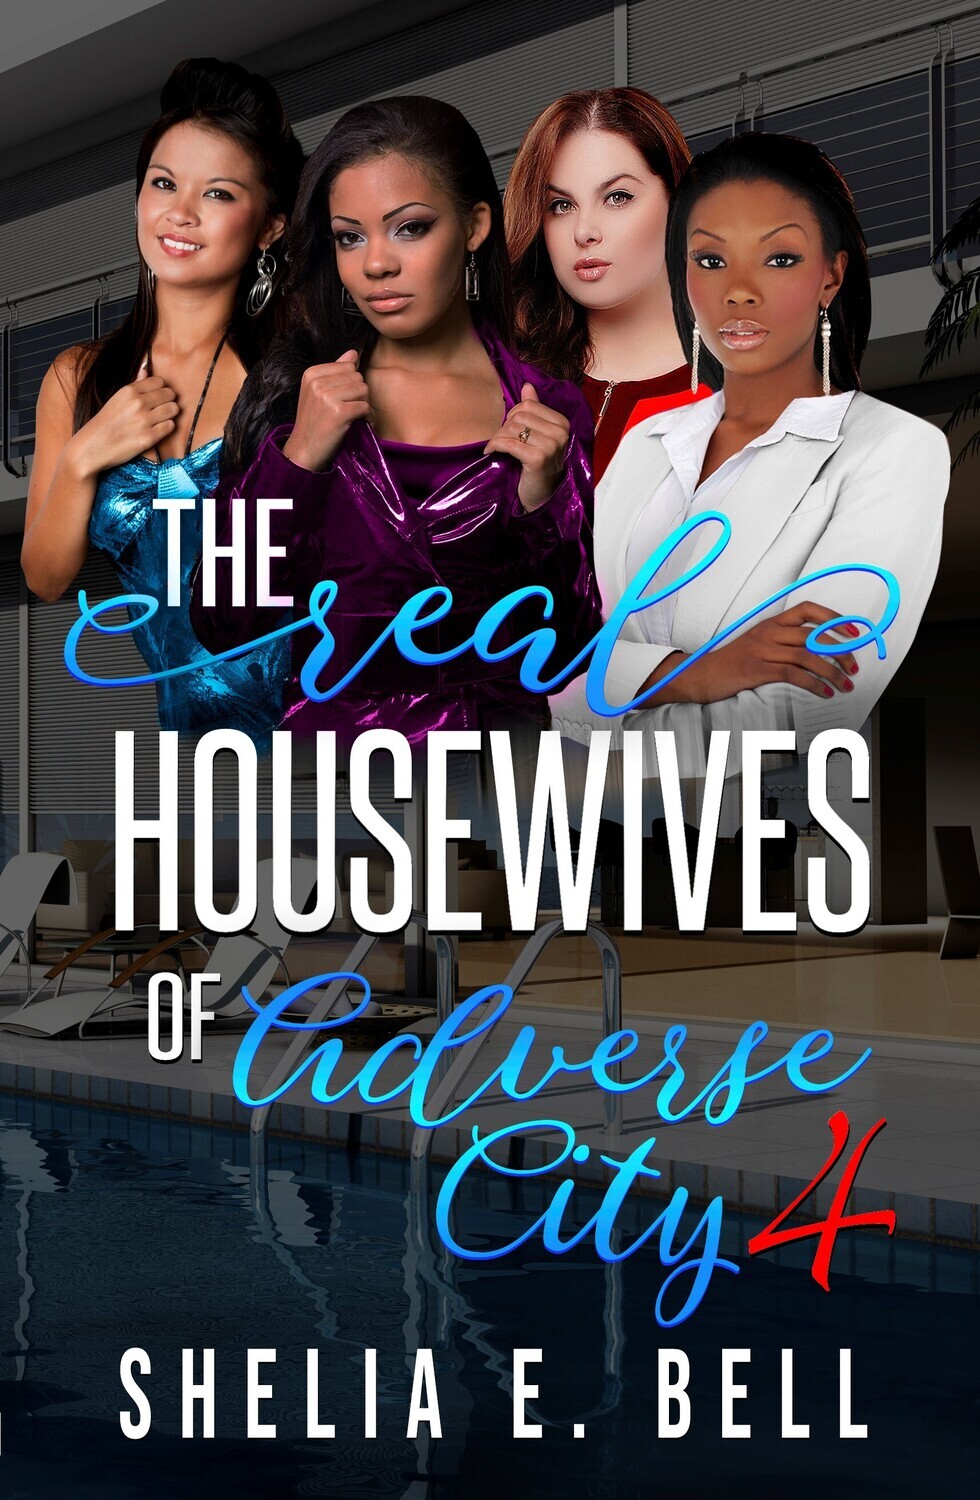 THE REAL HOUSEWIVES OF ADVERSE CITY (Book 4)